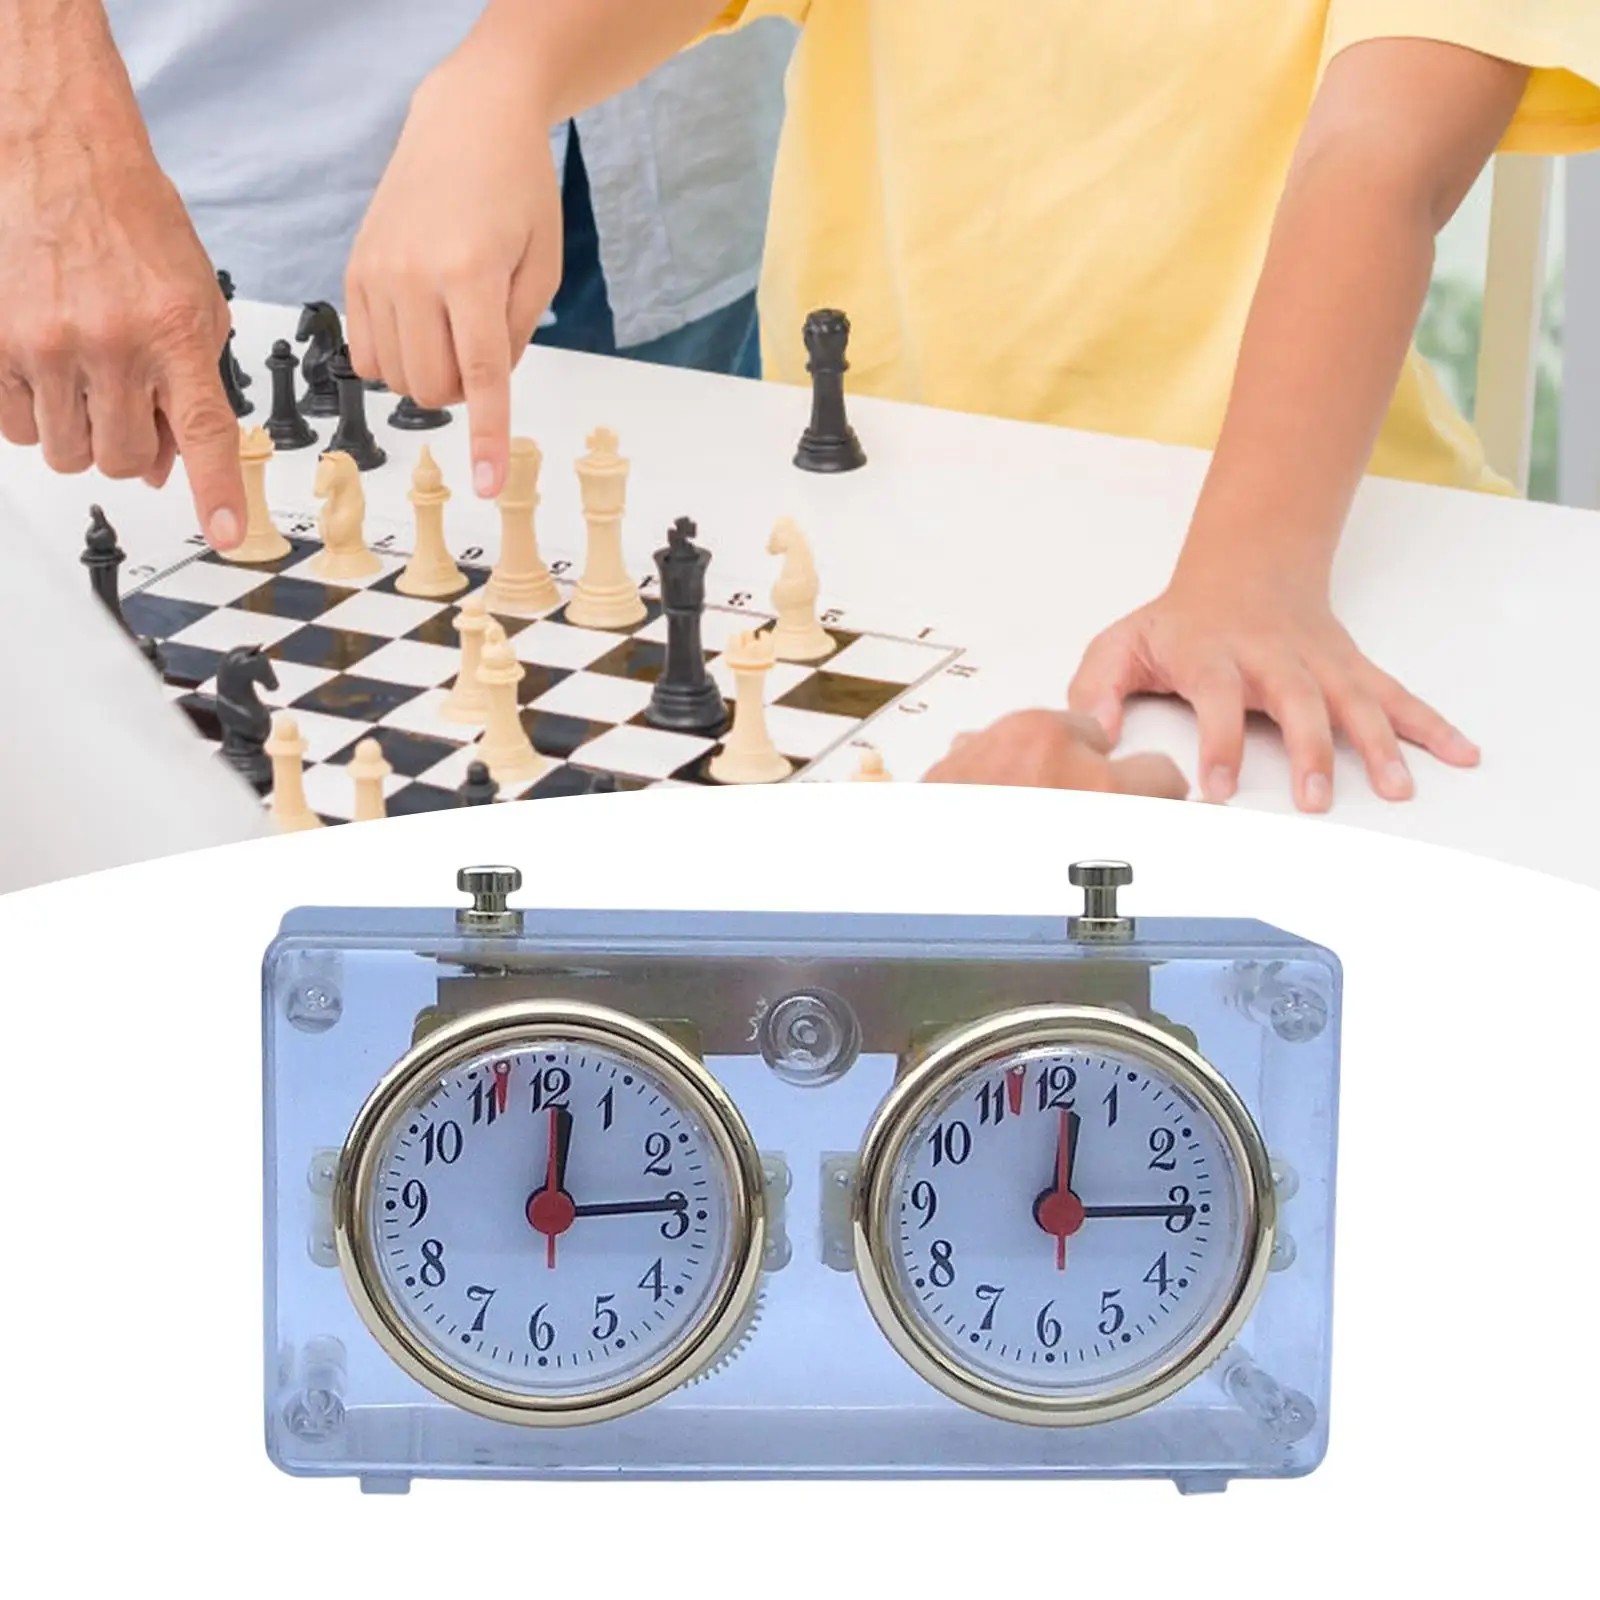 Portable Digital Timer Durable Count up Down Chess Clock for Training Board Games